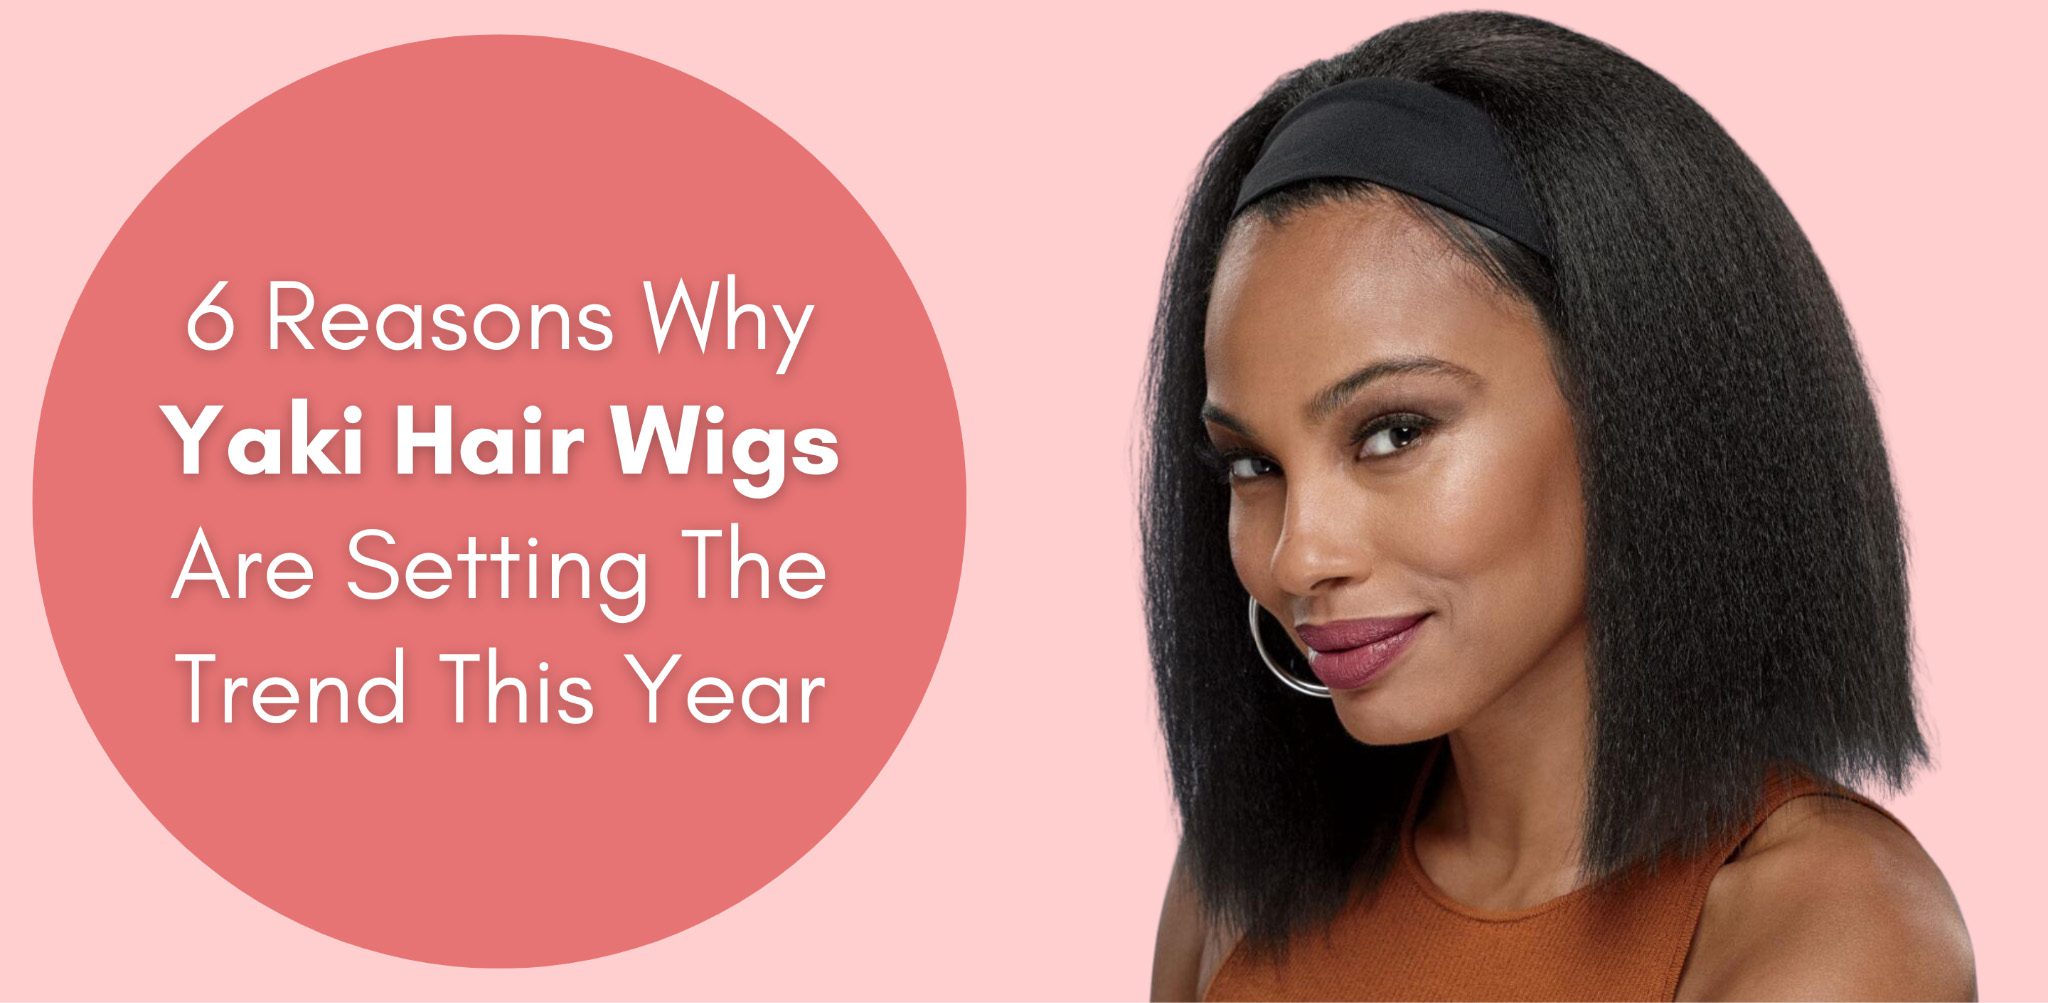 6 Reasons Why Yaki Hair Wigs Are Setting The Trend This Year